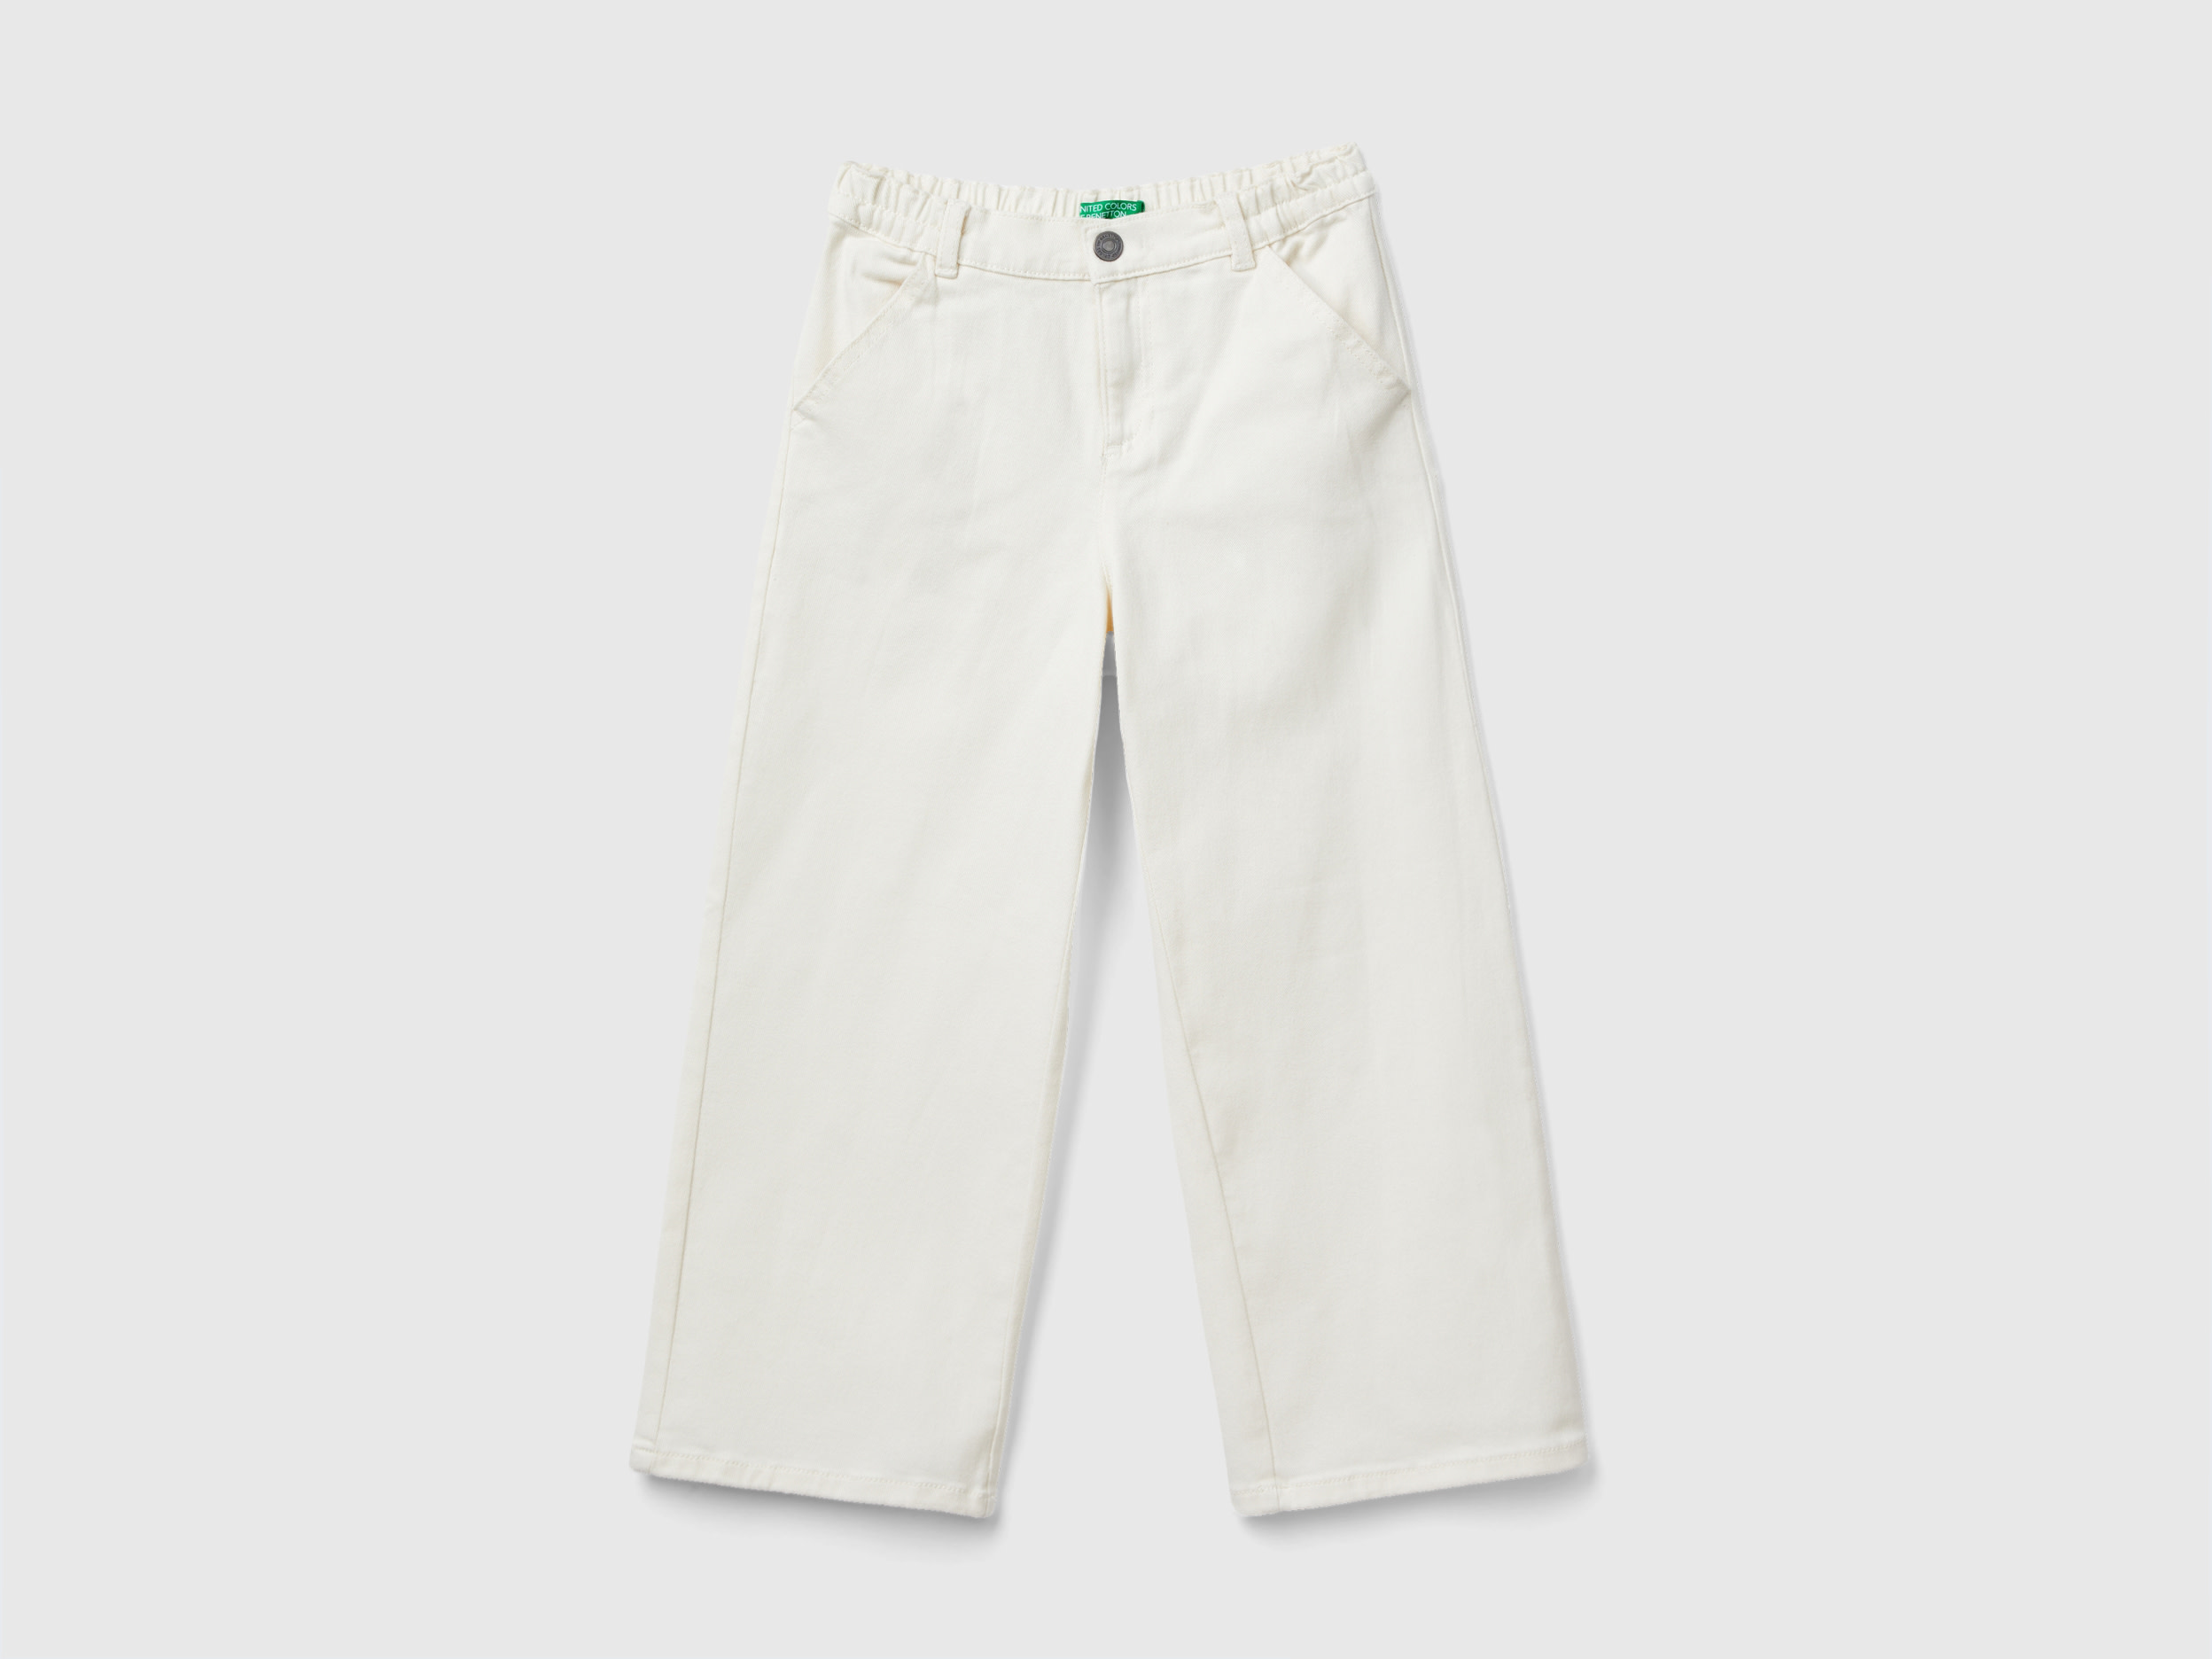 Benetton, High-waisted Straight Fit Trousers, size 3XL, Creamy White, Kids